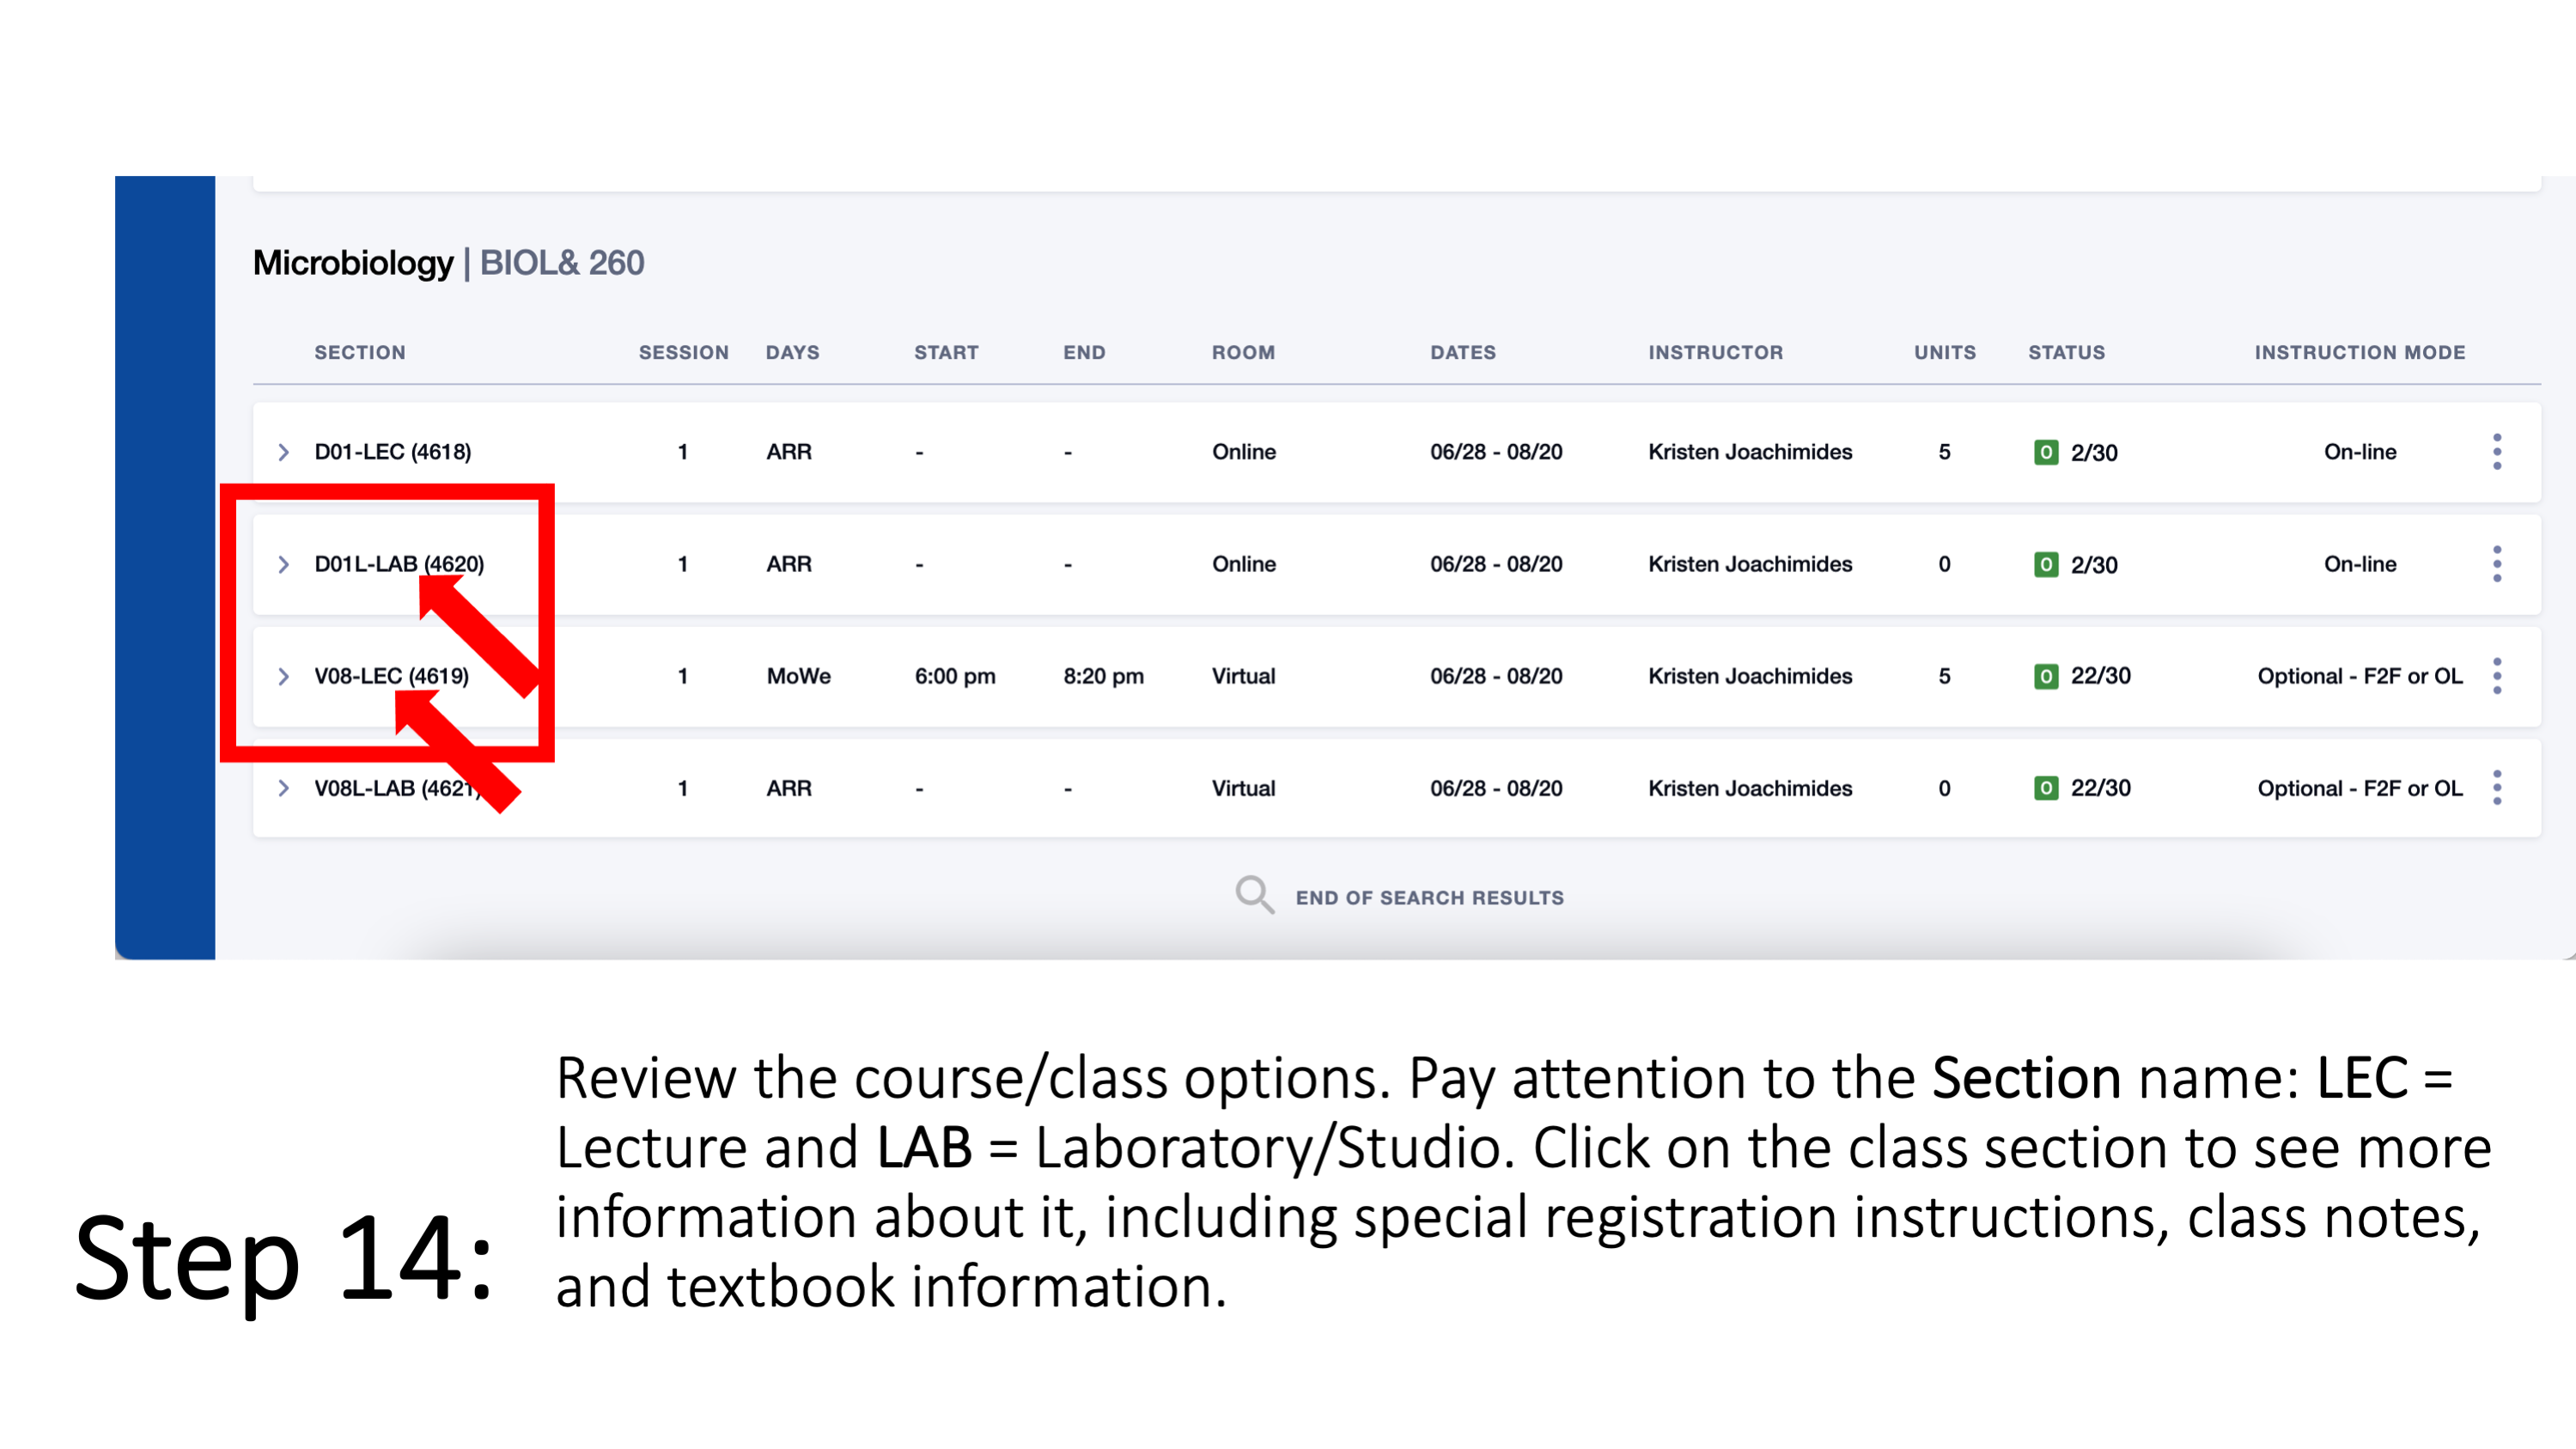 Step 14: Review the course/class options. Pay attention to the Section name: LEC = Lecture and LAB = Laboratory/Studio. Click on the class section to see more information about it, including special registration instructions, class notes, and textbook information.